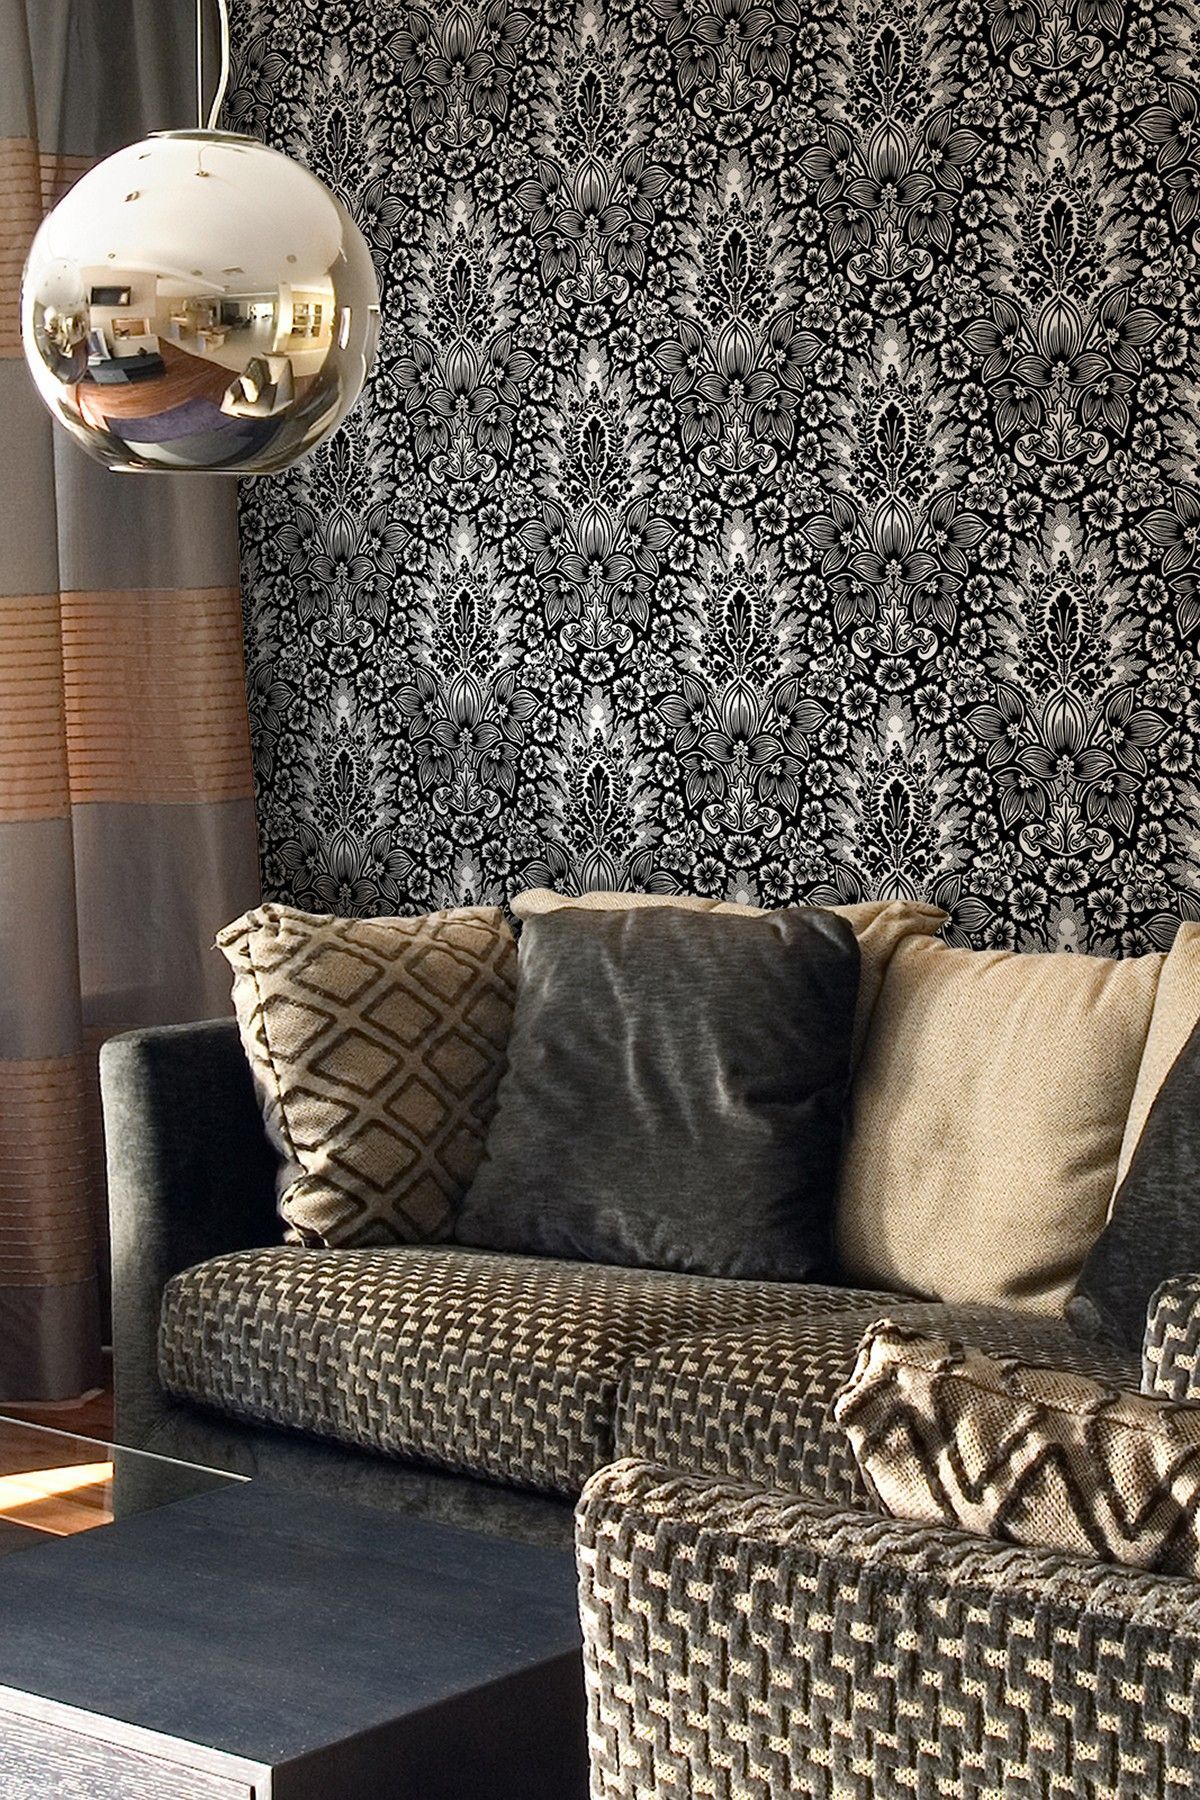 Polynesian Damask Removable Wall Decal// | Funky Home Decor, Decor Regarding Most Recent Damask Wall Art (View 5 of 20)